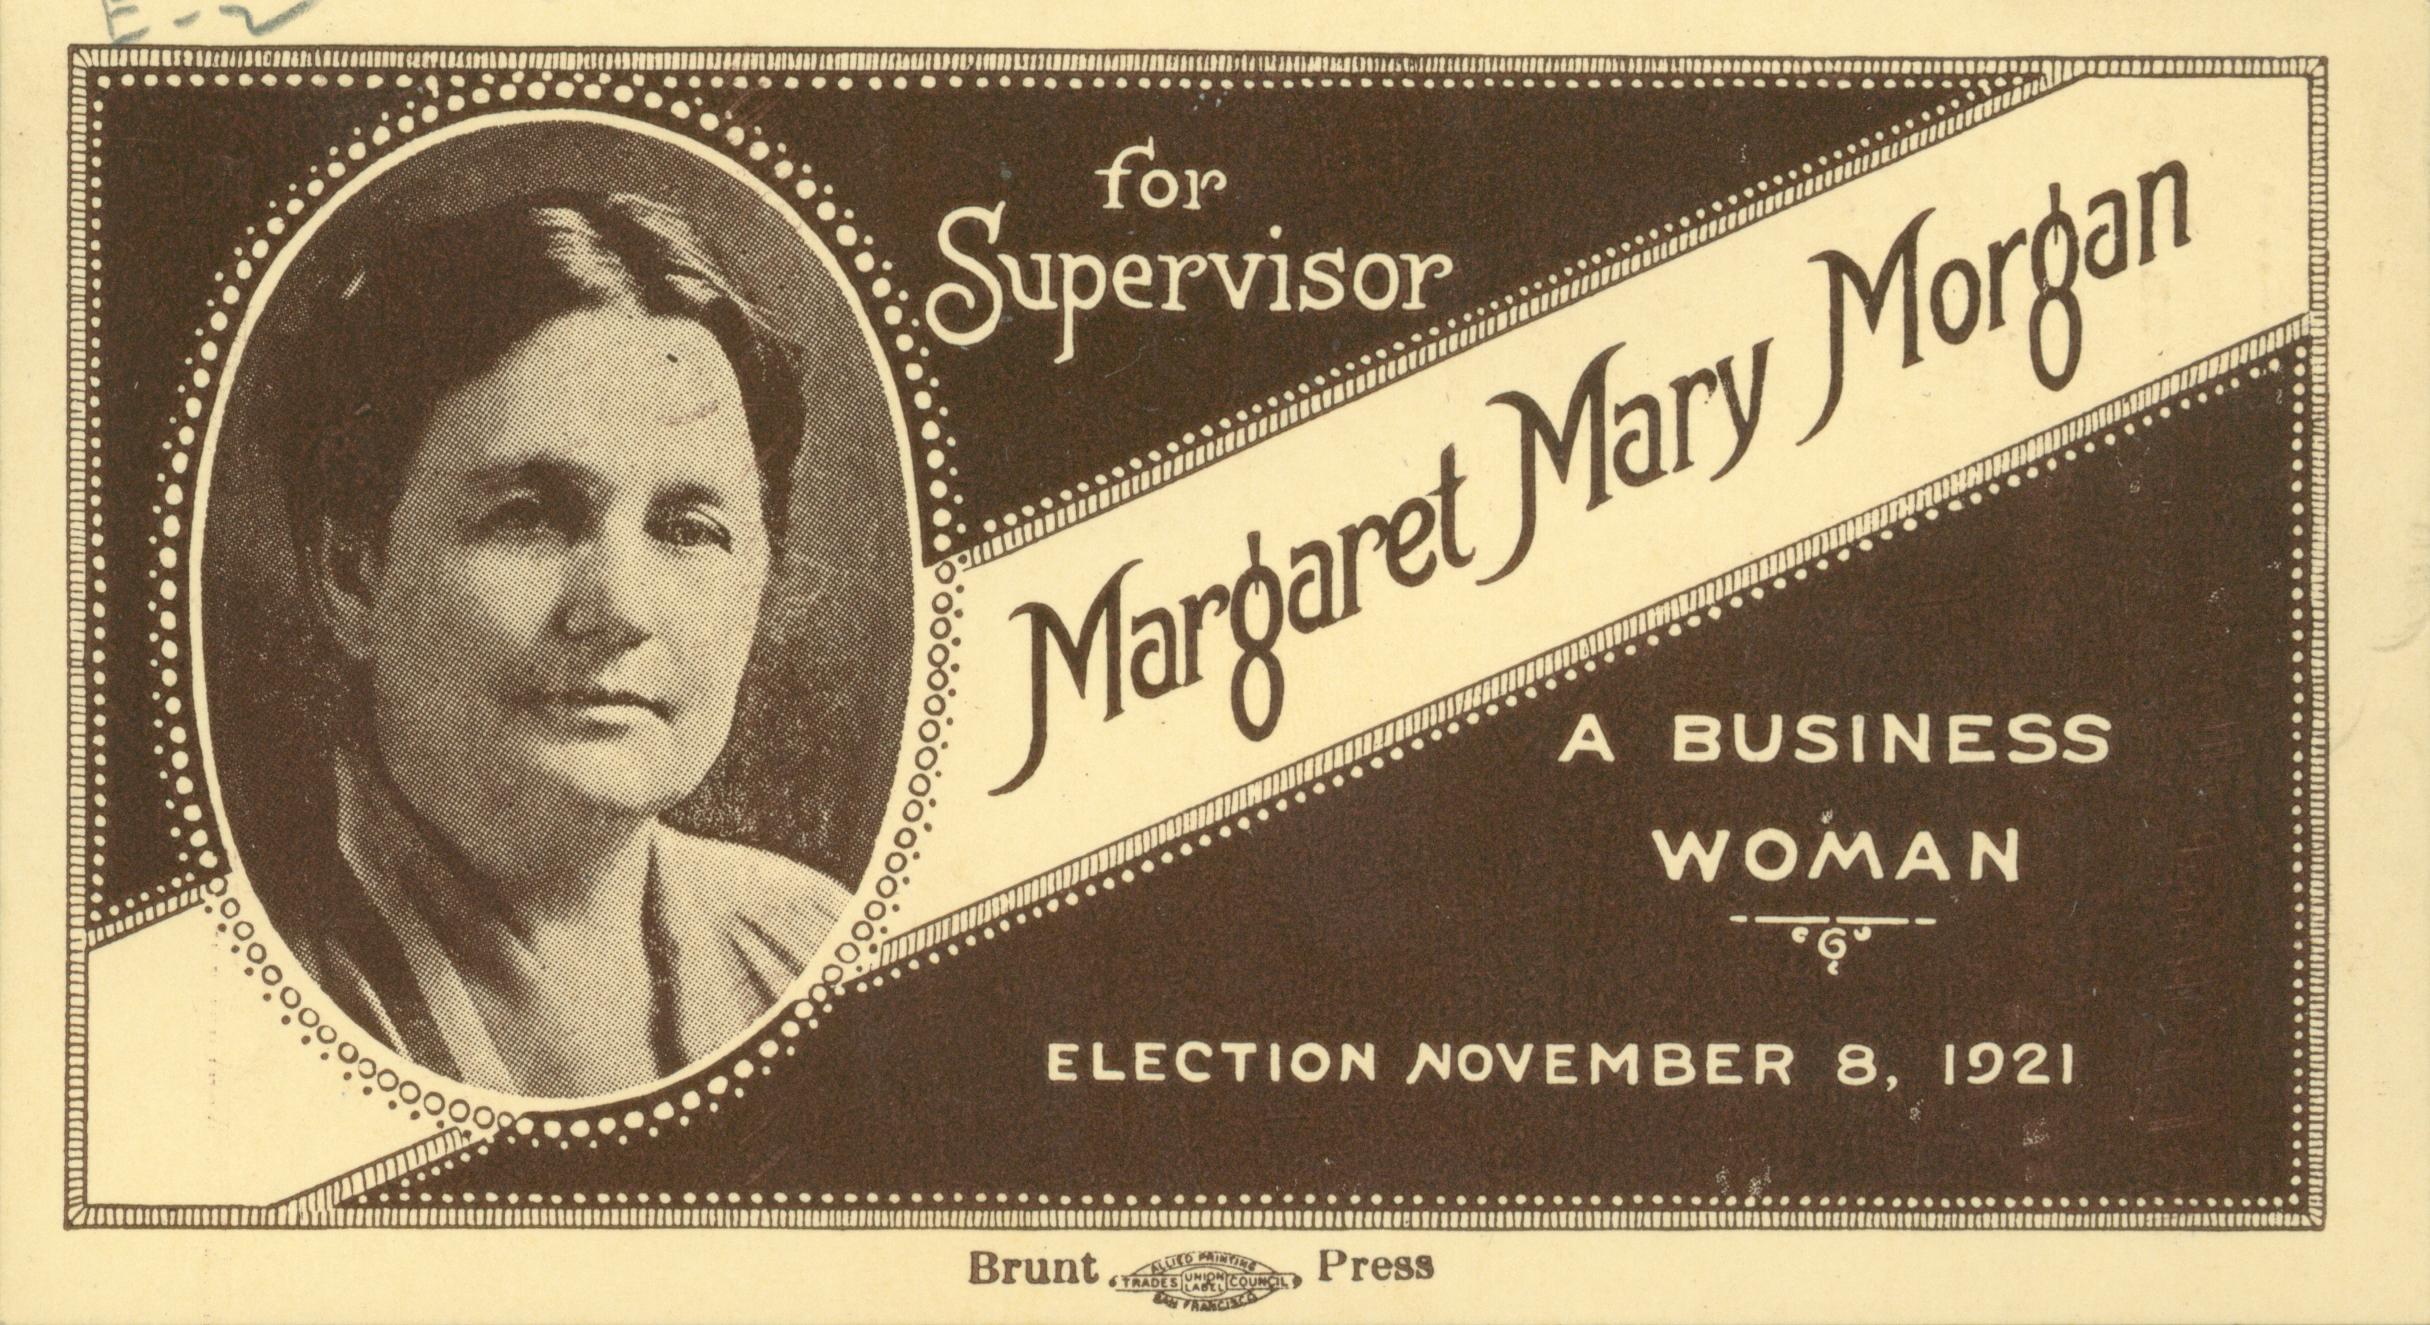 This card shows a portrait of Margaret Mary Morgan next to an exhortation to elect her as supervisor for San Francisco County